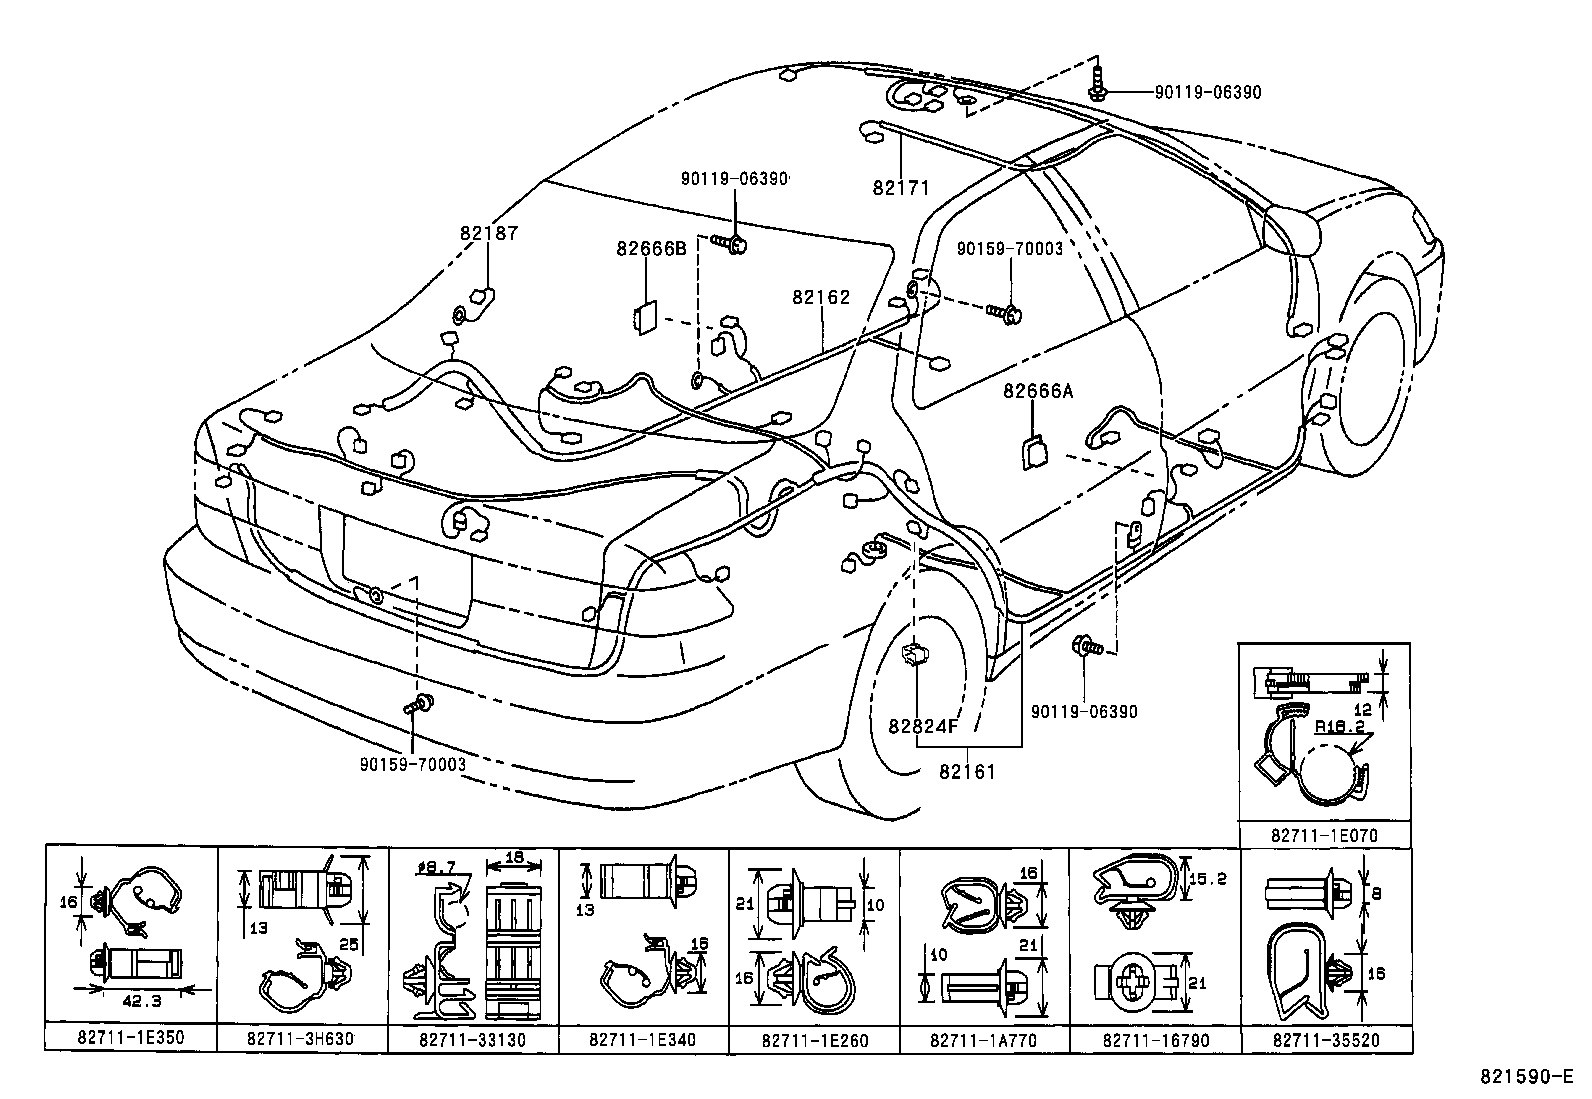  CAMRY |  WIRING CLAMP